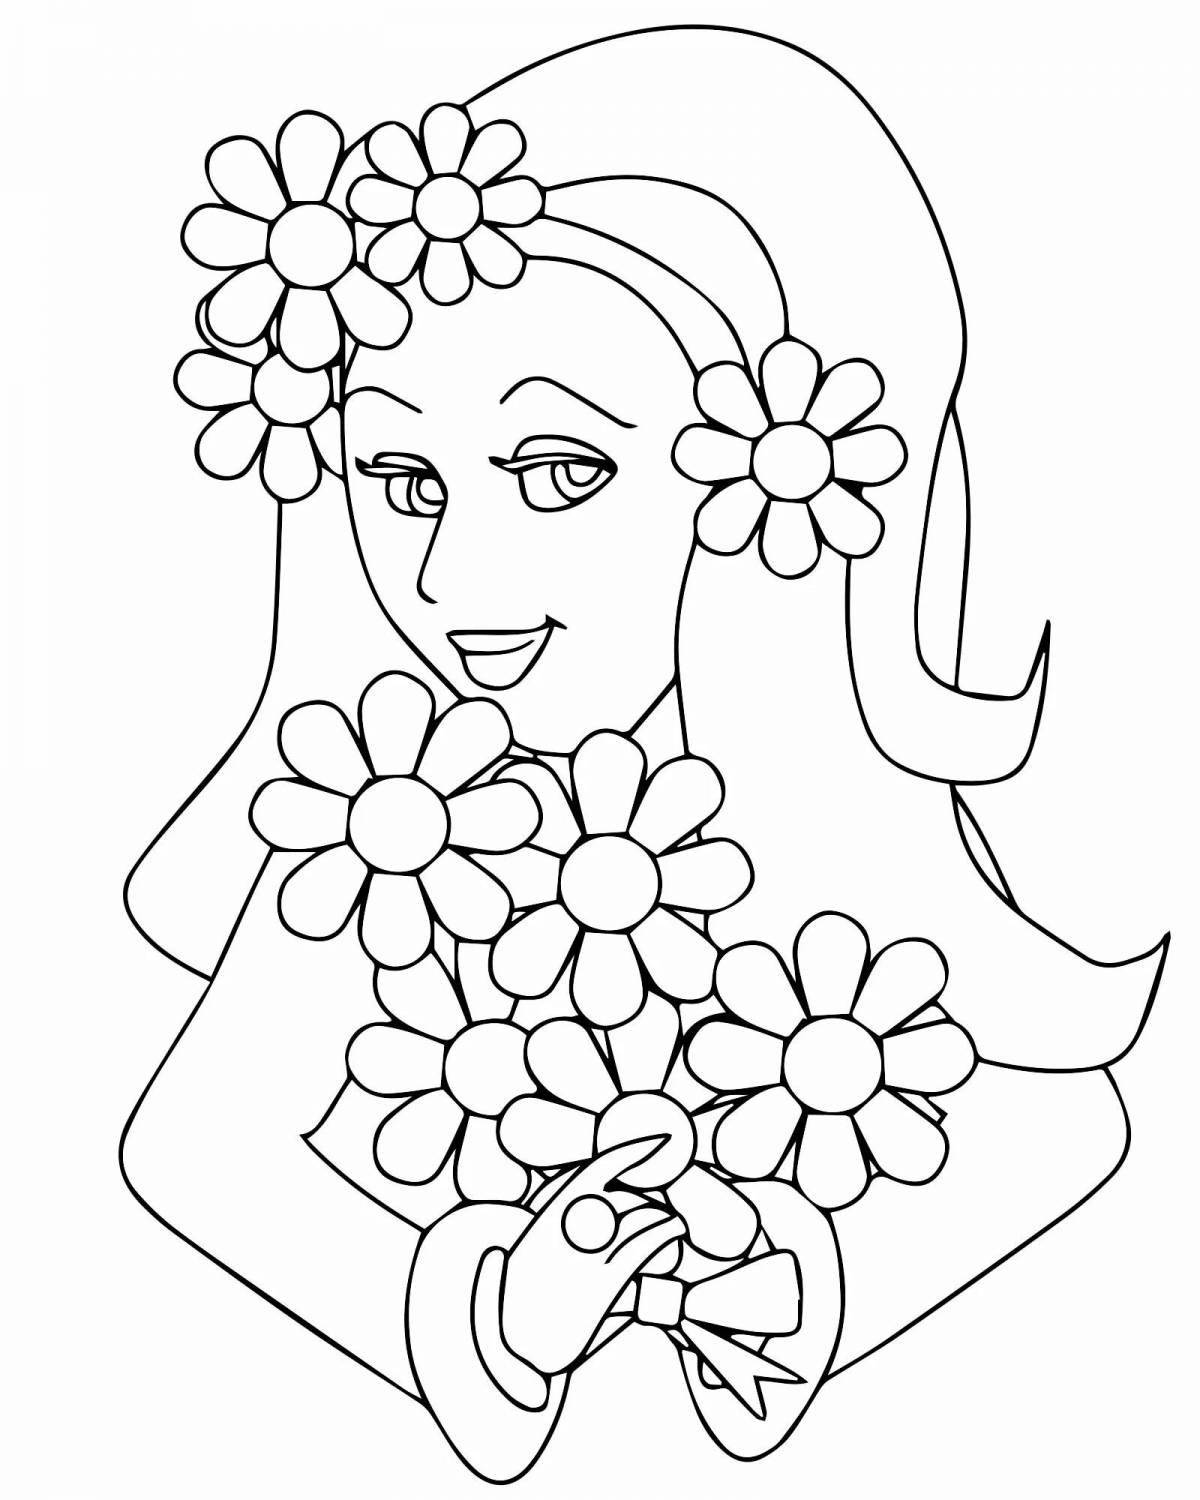 Cheerful woman coloring book for children